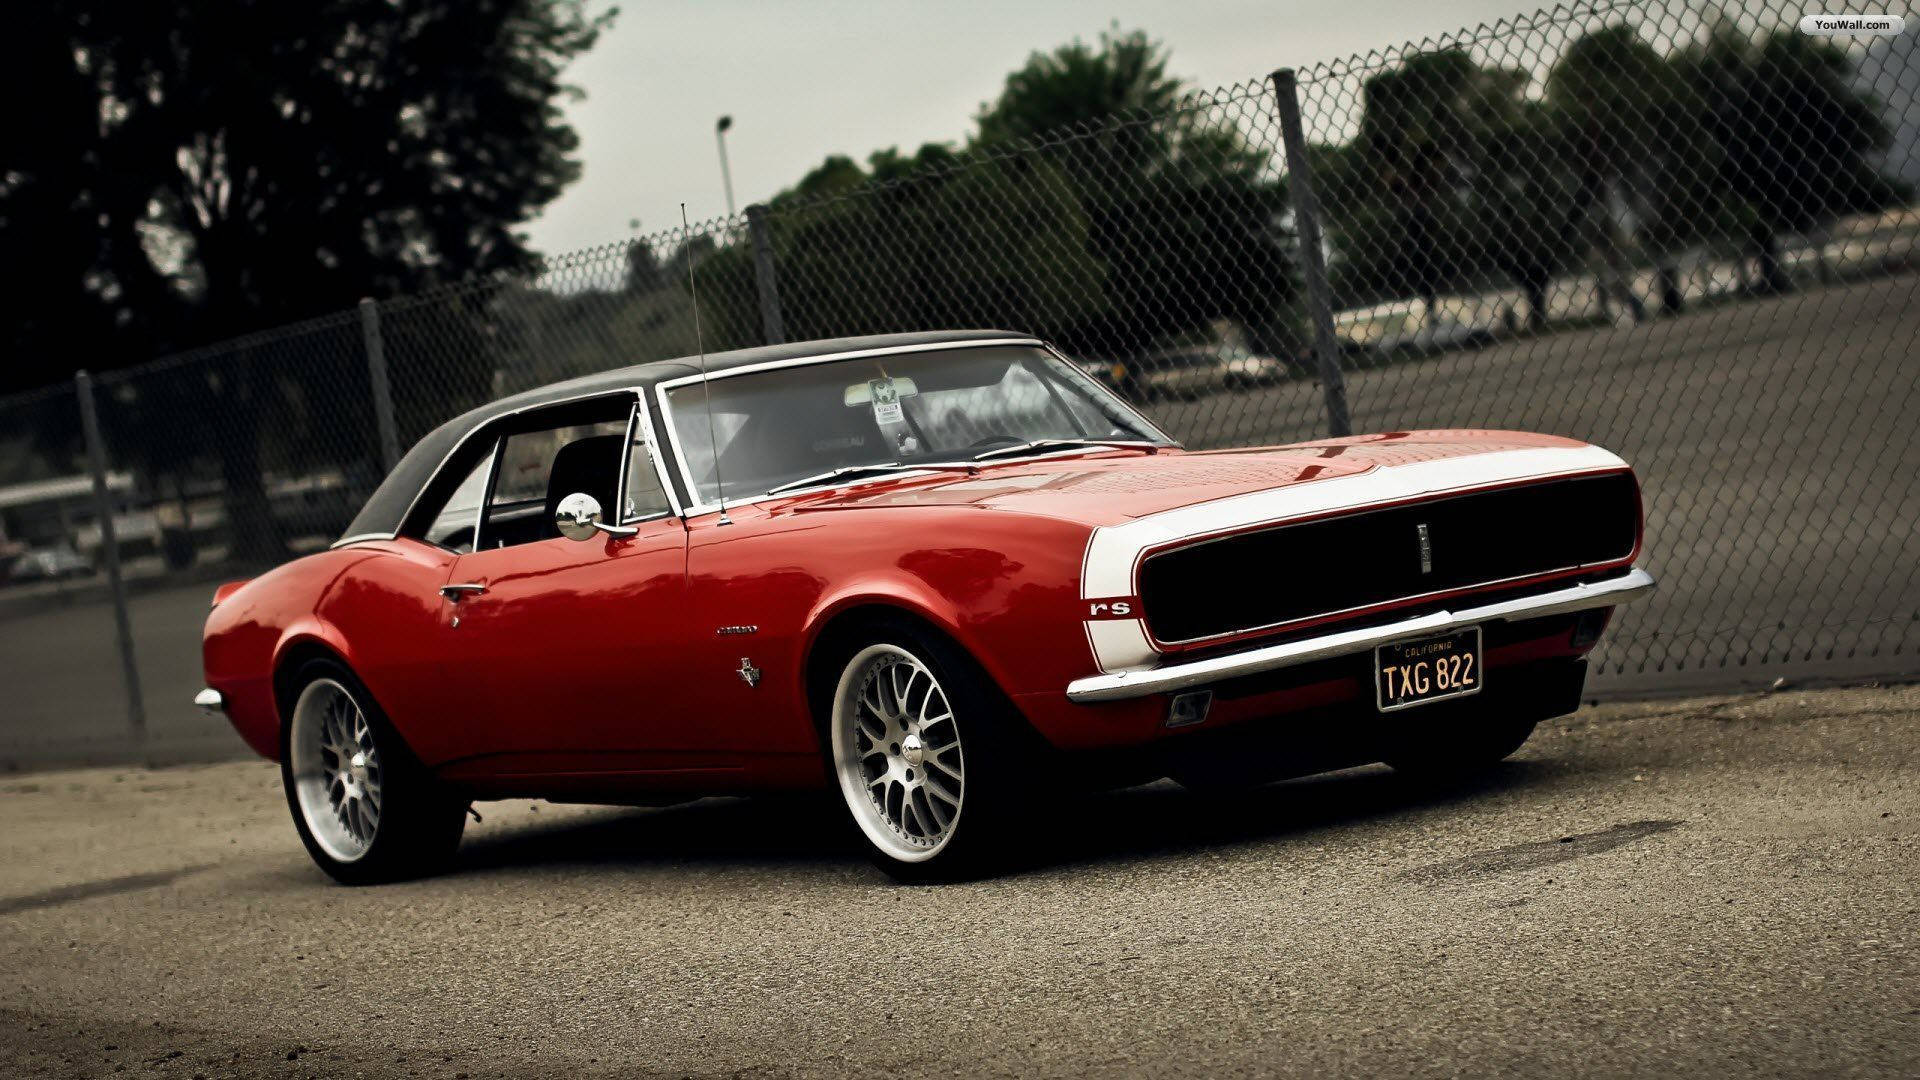 Red Convertible Chevrolet Muscle Car Wallpaper